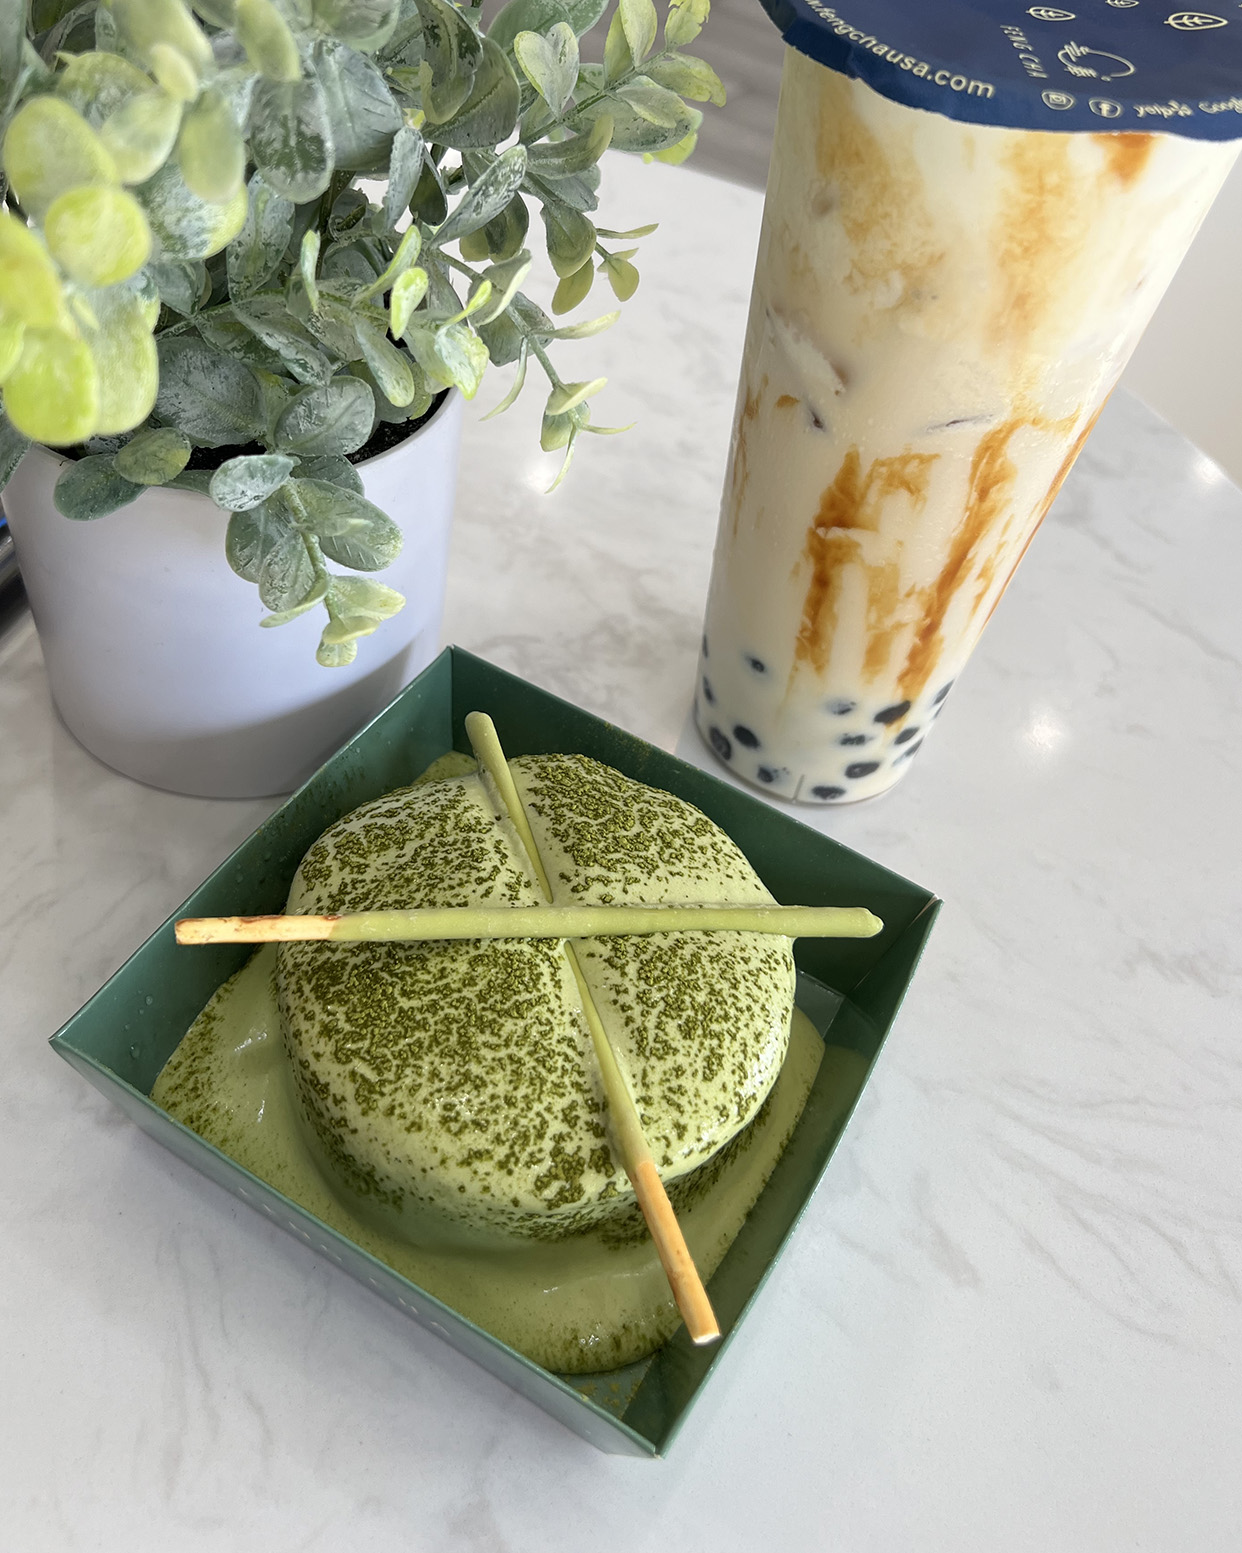 Matcha Love cake and Dirty Boba drink at Feng Cha Teahouse in Costa Mesa, California (Photo by Julie Nguyen)